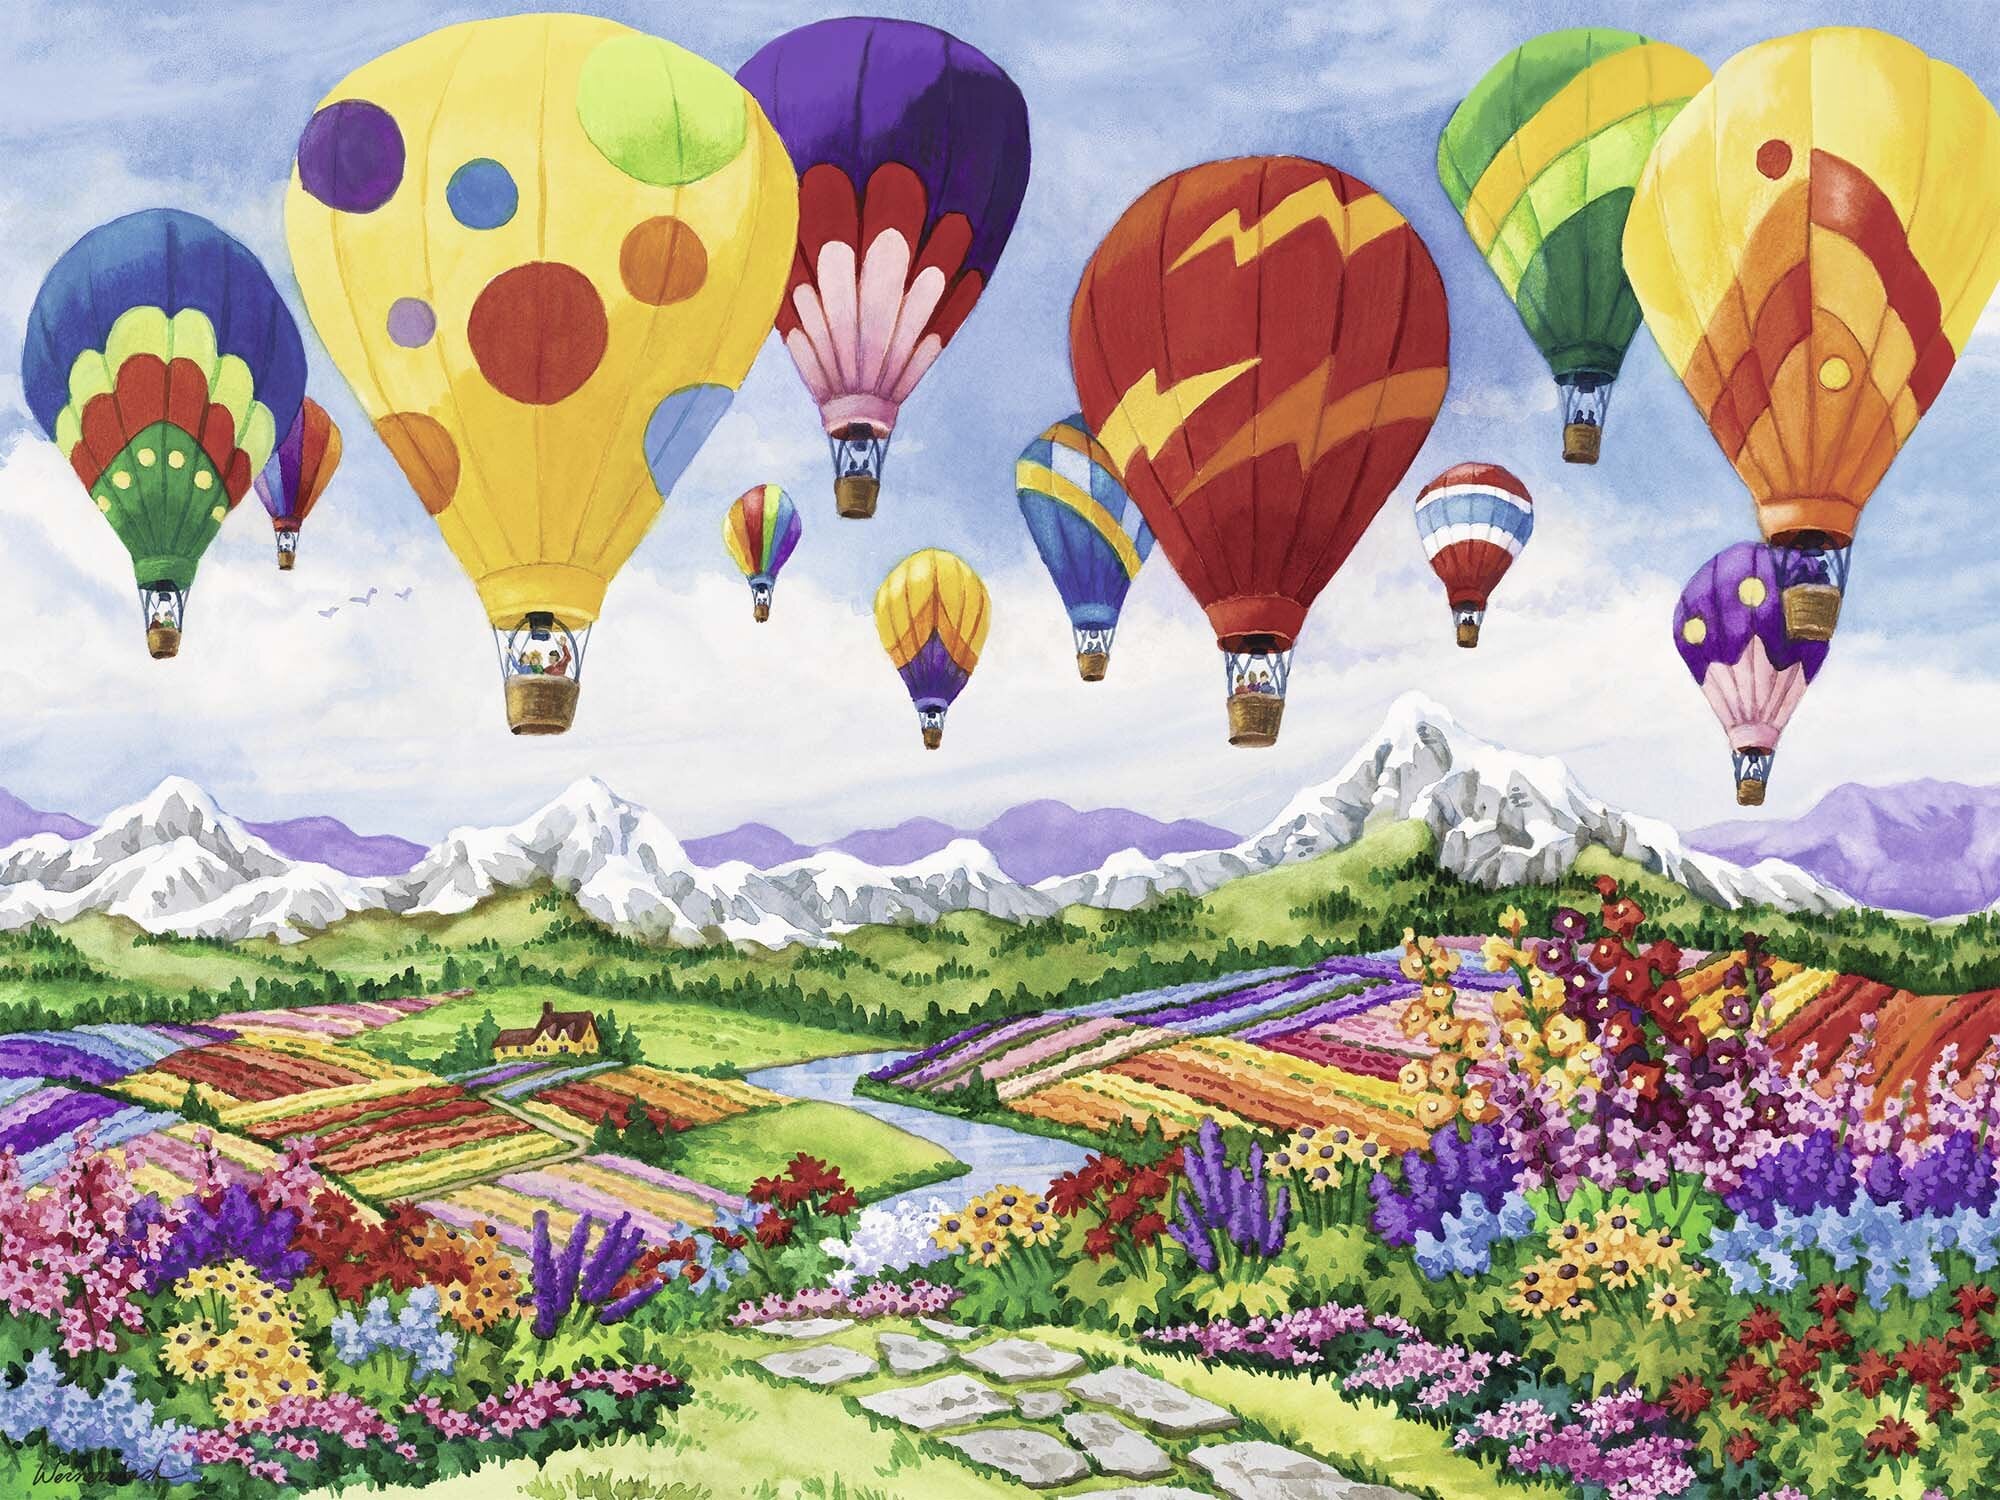 Ravensburger Puslespill, Spring is in the Air 1500 brikker